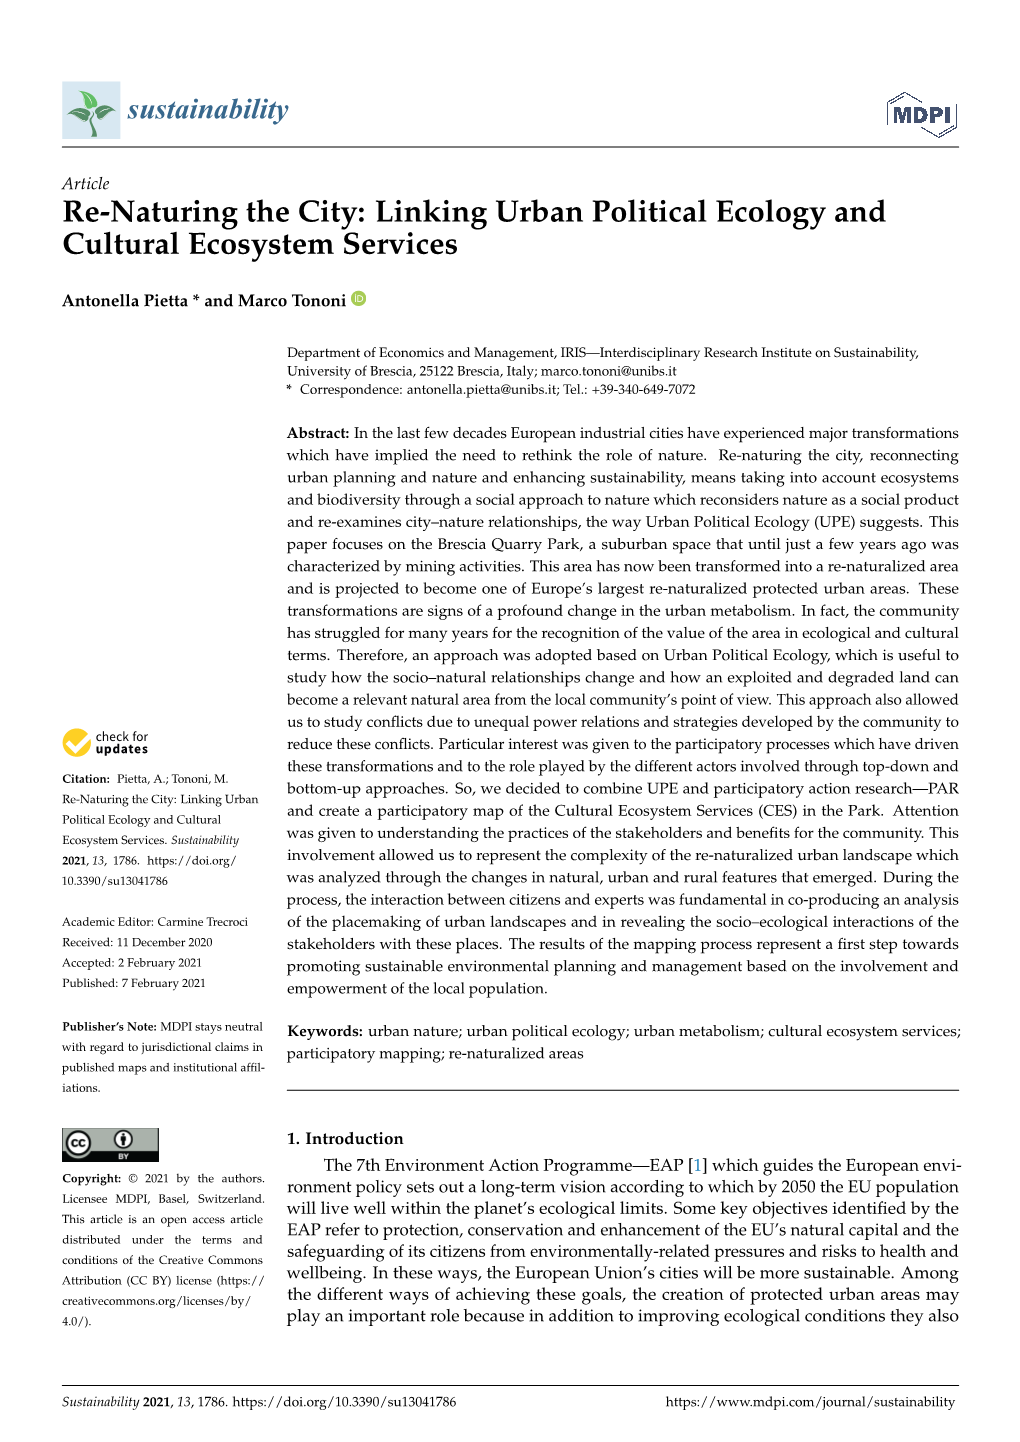 Linking Urban Political Ecology and Cultural Ecosystem Services